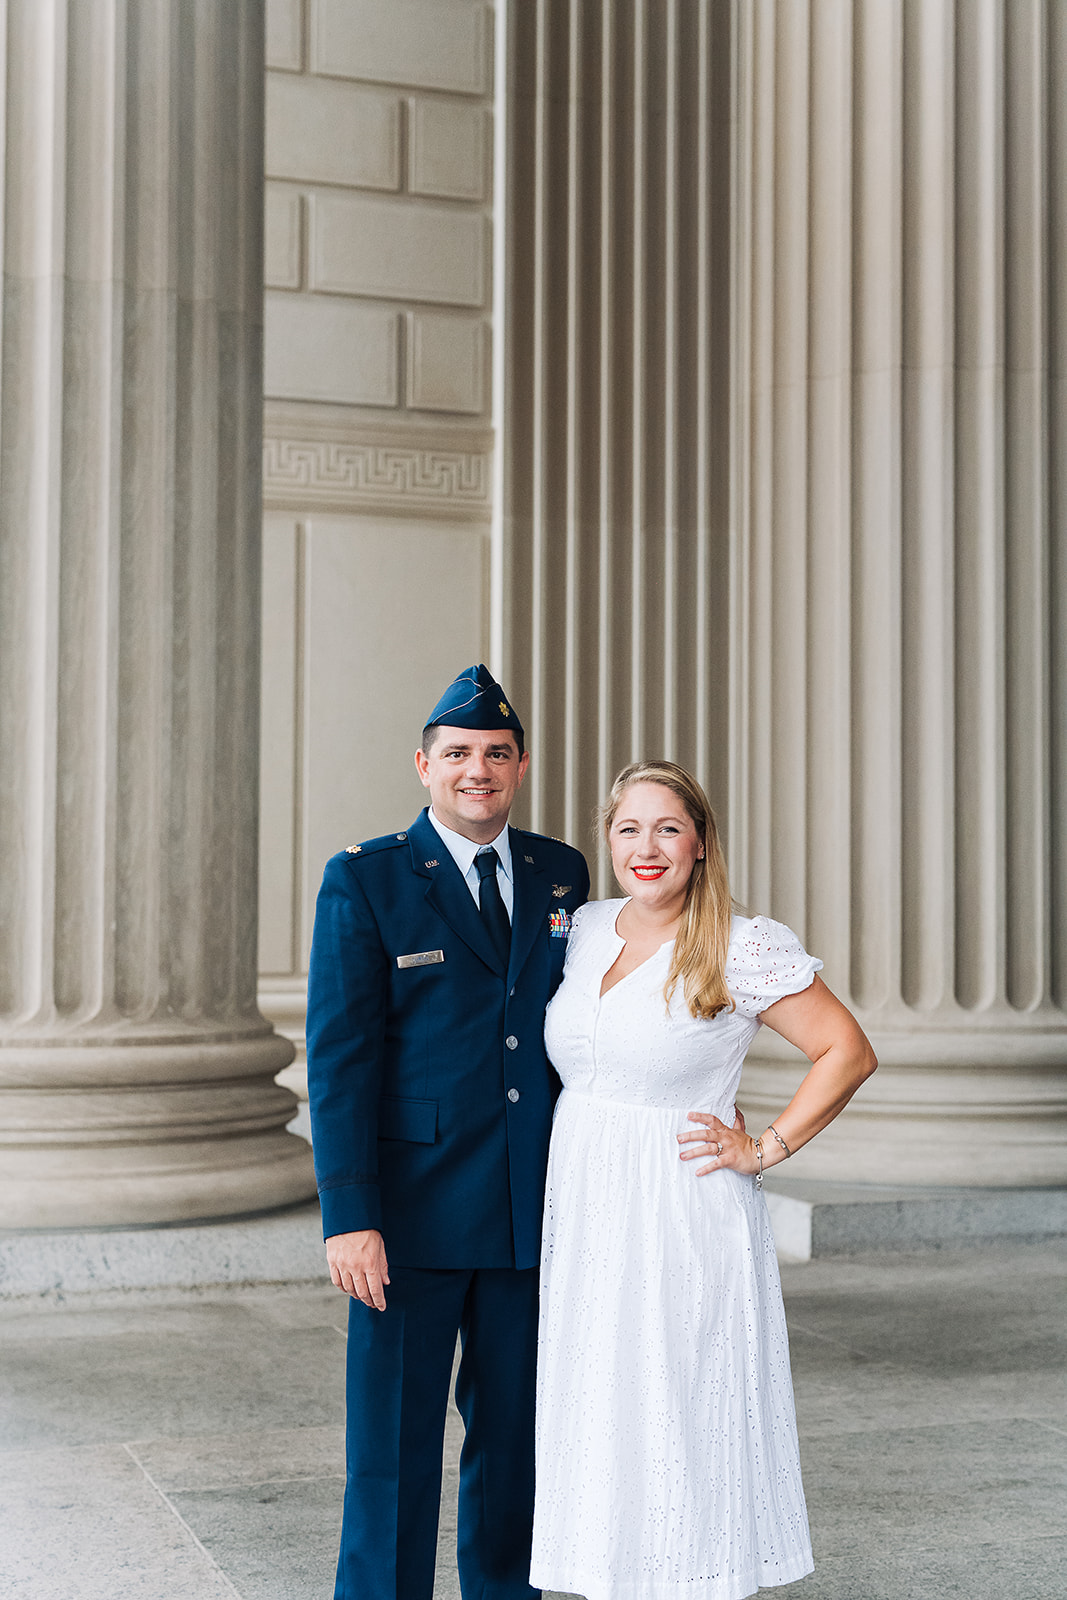 Air force promotion ceremony